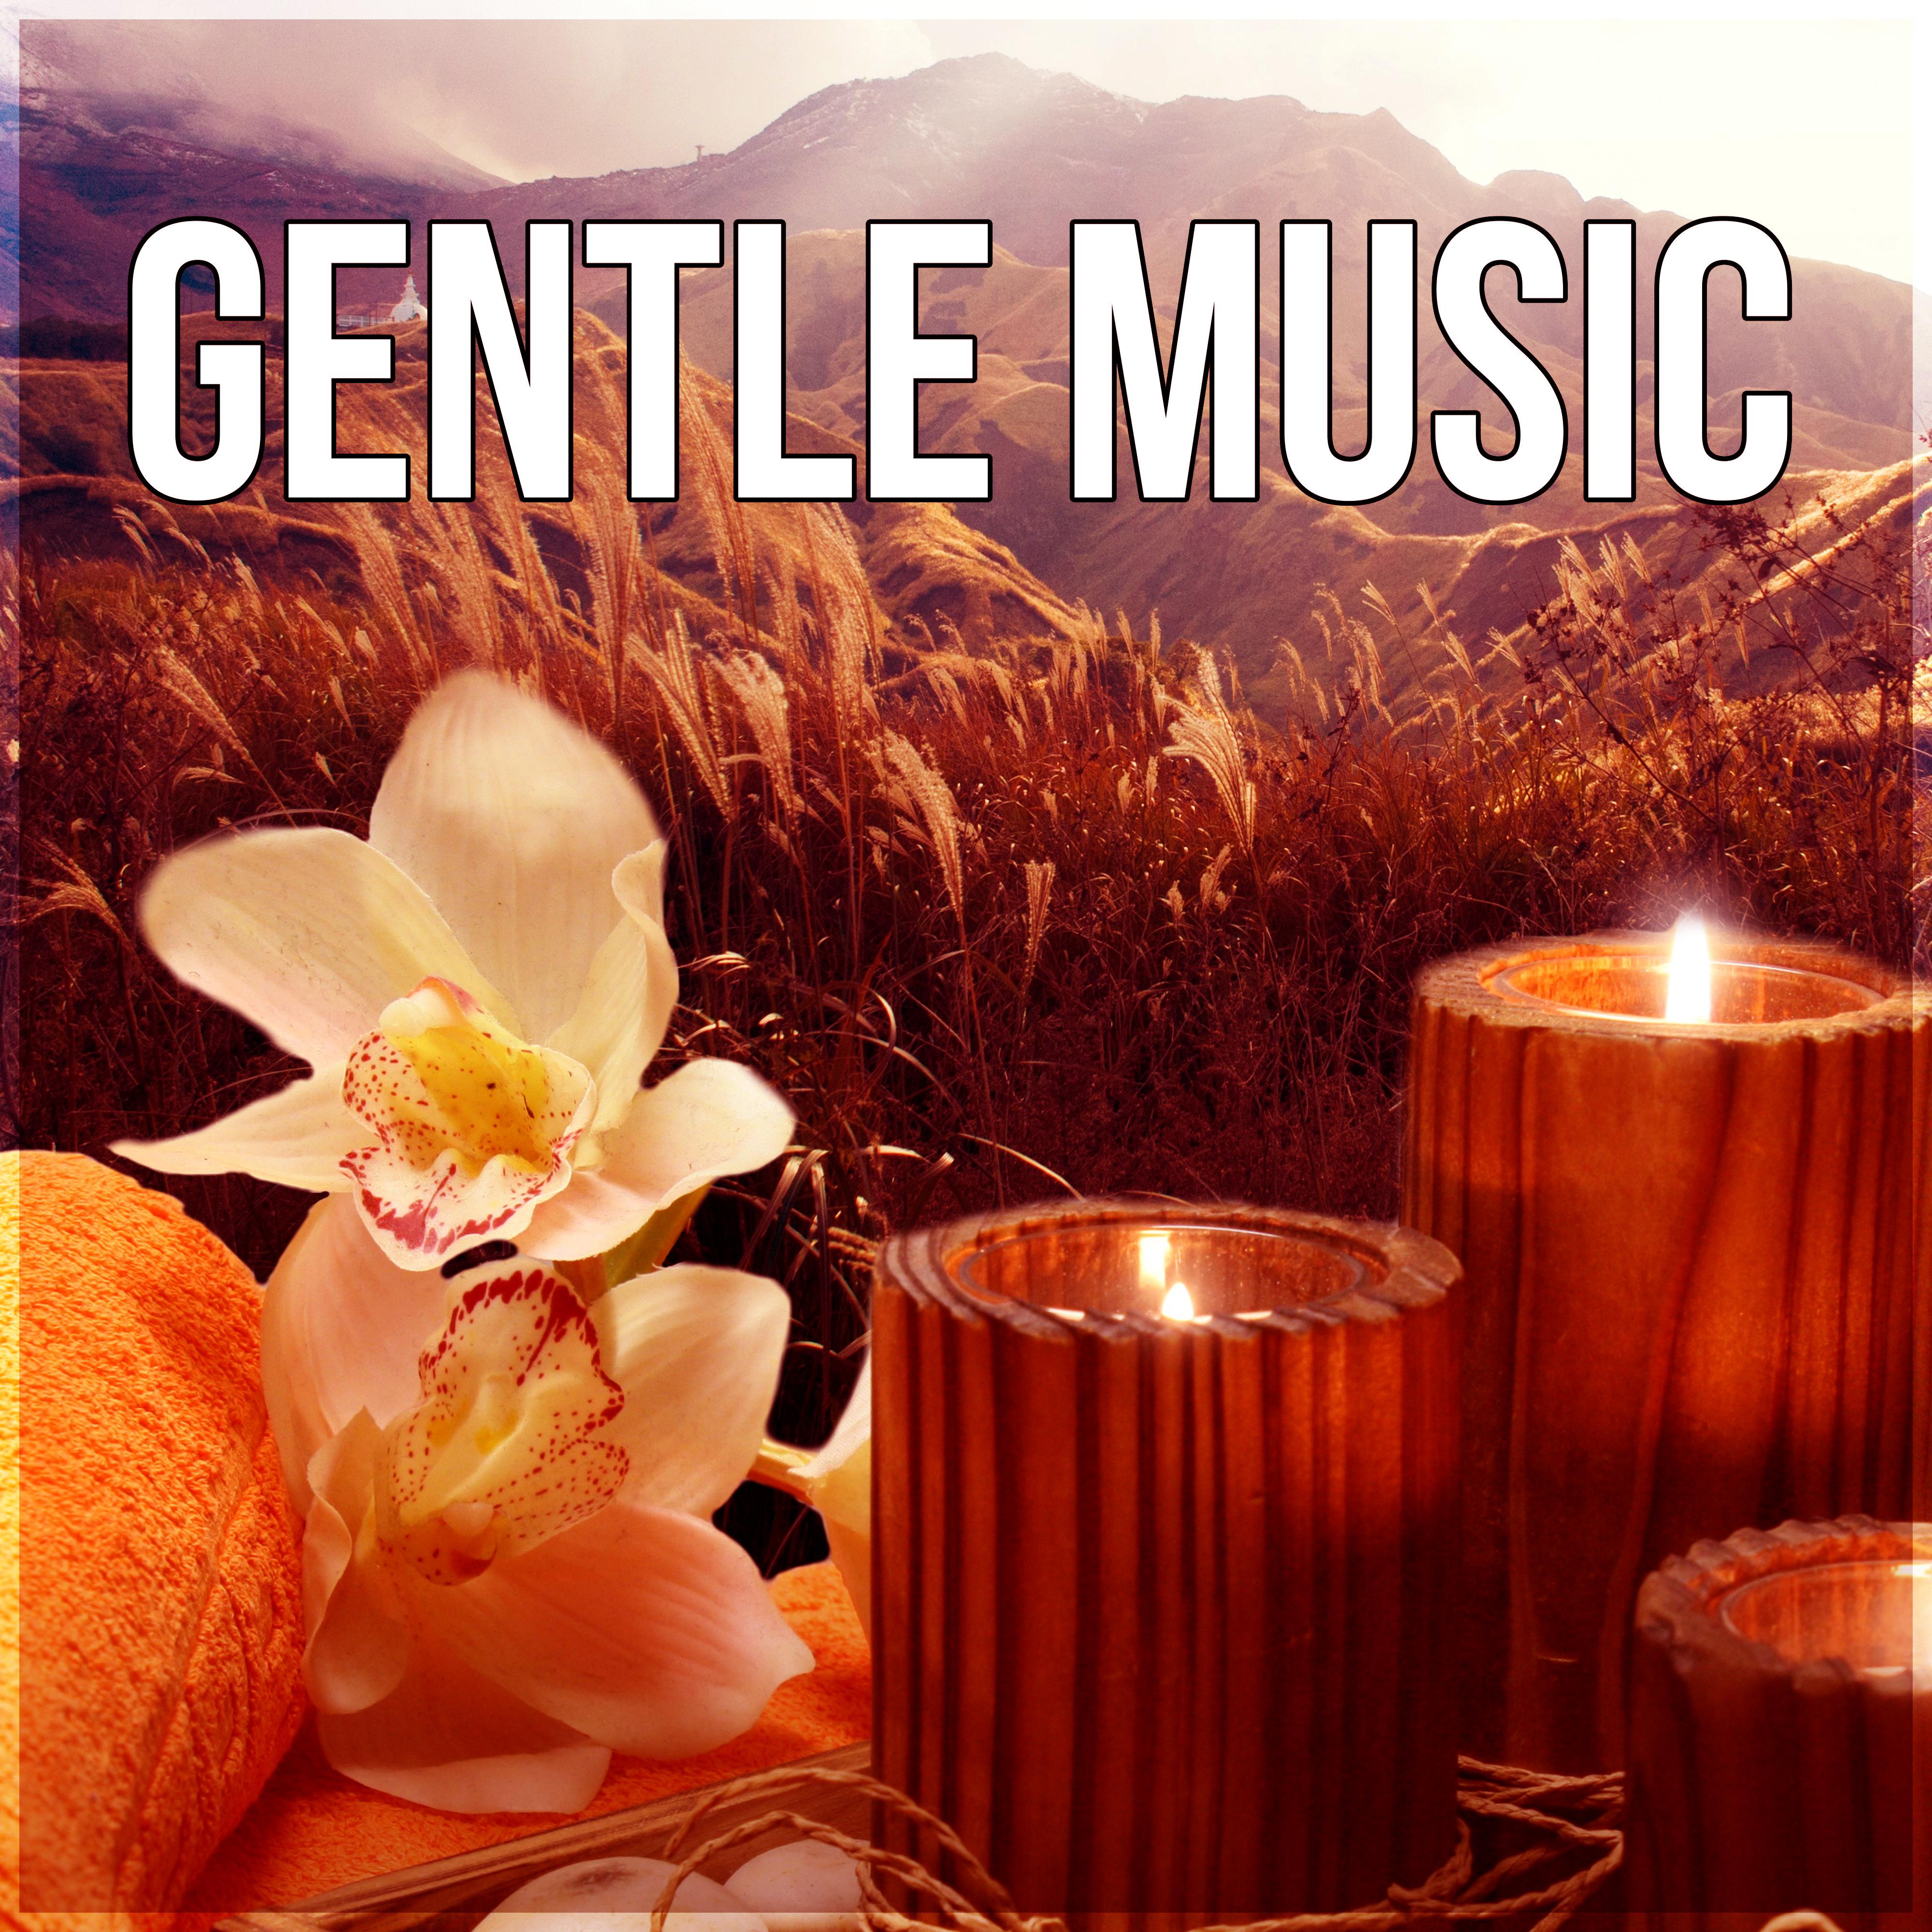 Gentle Music – Spa Sounds, Therapy Music, Nature Sounds, Just Relax, Sound Therapy, Healing Massage, Wellness Spa